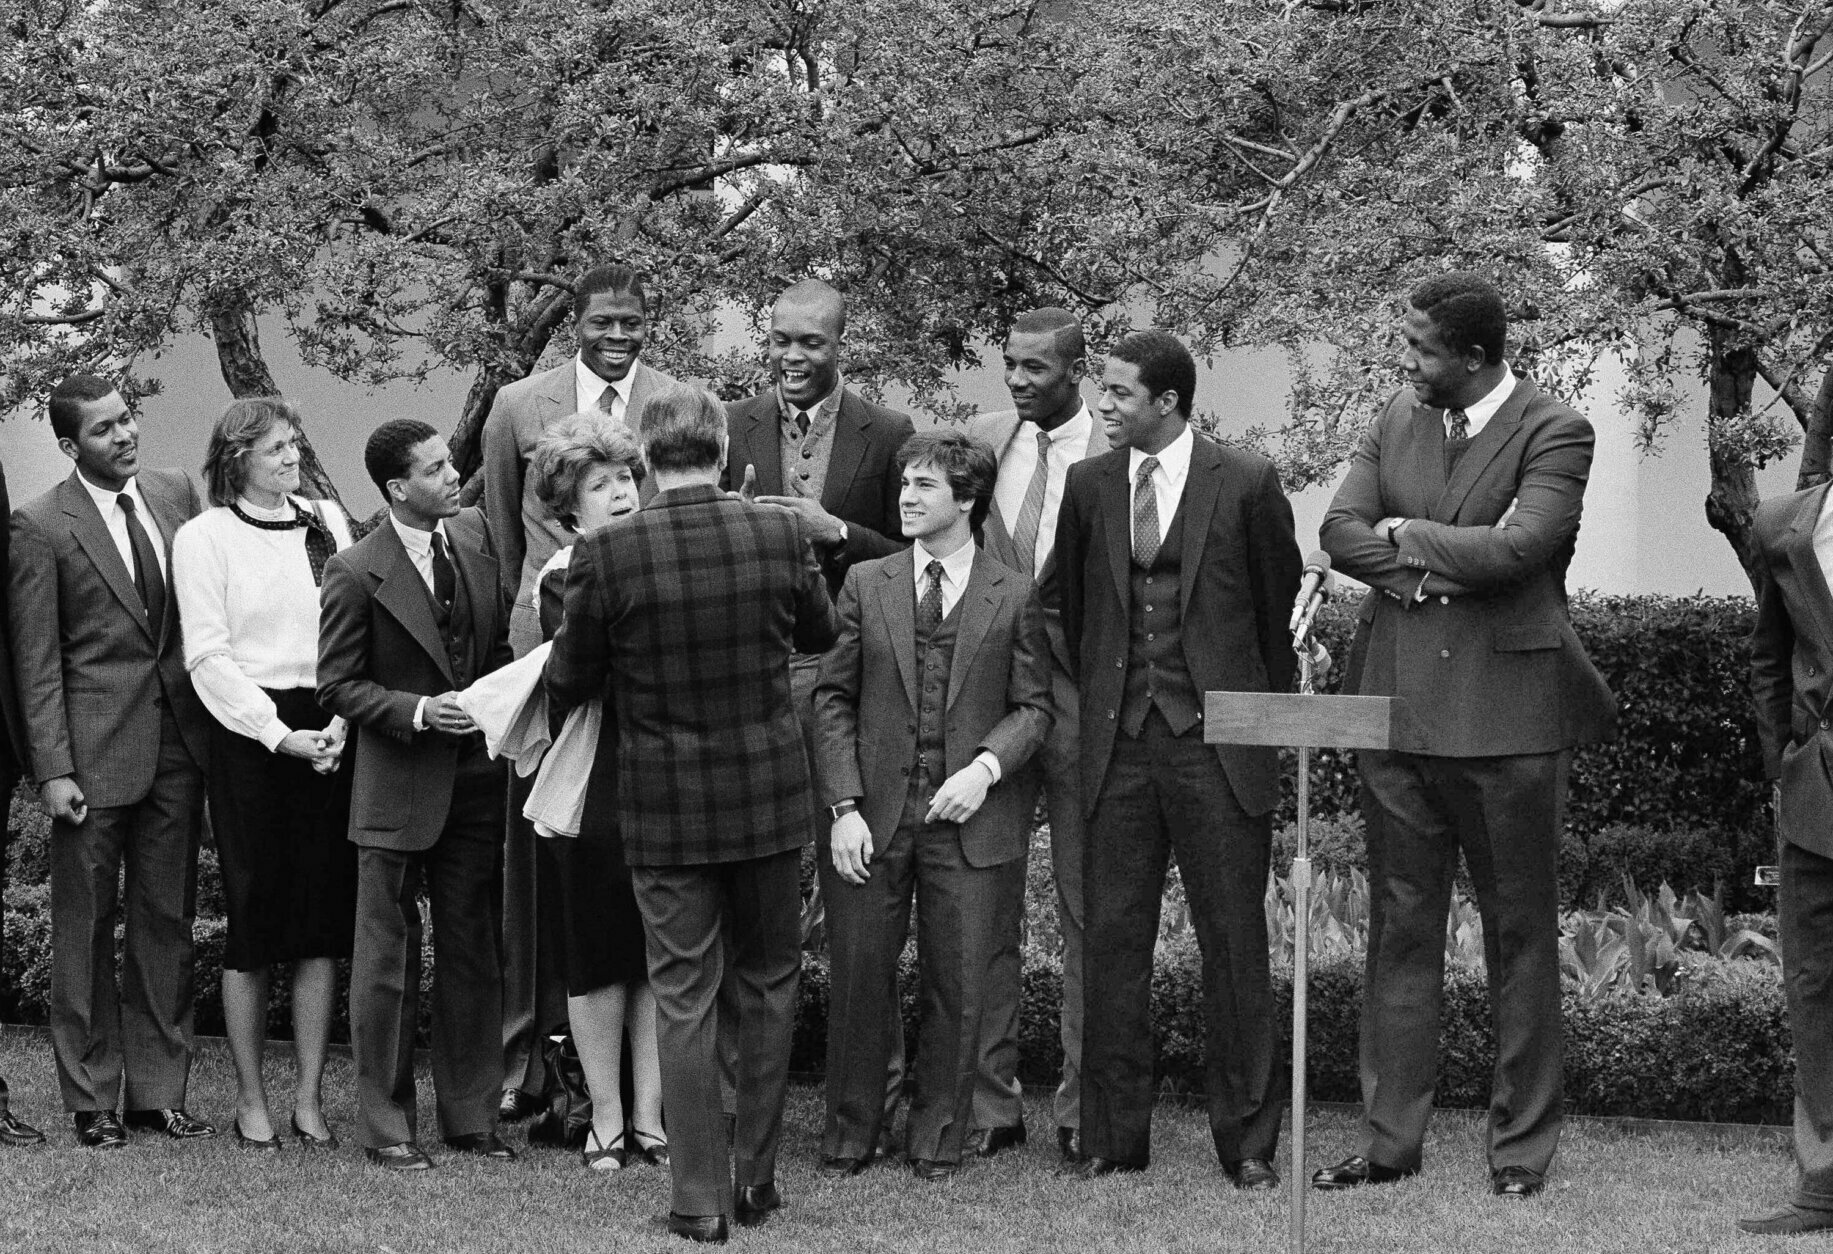 U.S.President Ronald Reagan shakes hands with Patrick Ewing, left, and Michael Graham, right, as Georgetown University academic coordinator Mary Fenlon looks on, during a ceremony for the Georgetown University NCAA Champion basketball team, in the Rose Garden of the White House, Saturday, April 7, 1984 in Washington. (AP Photo/Charles Tasnadi)